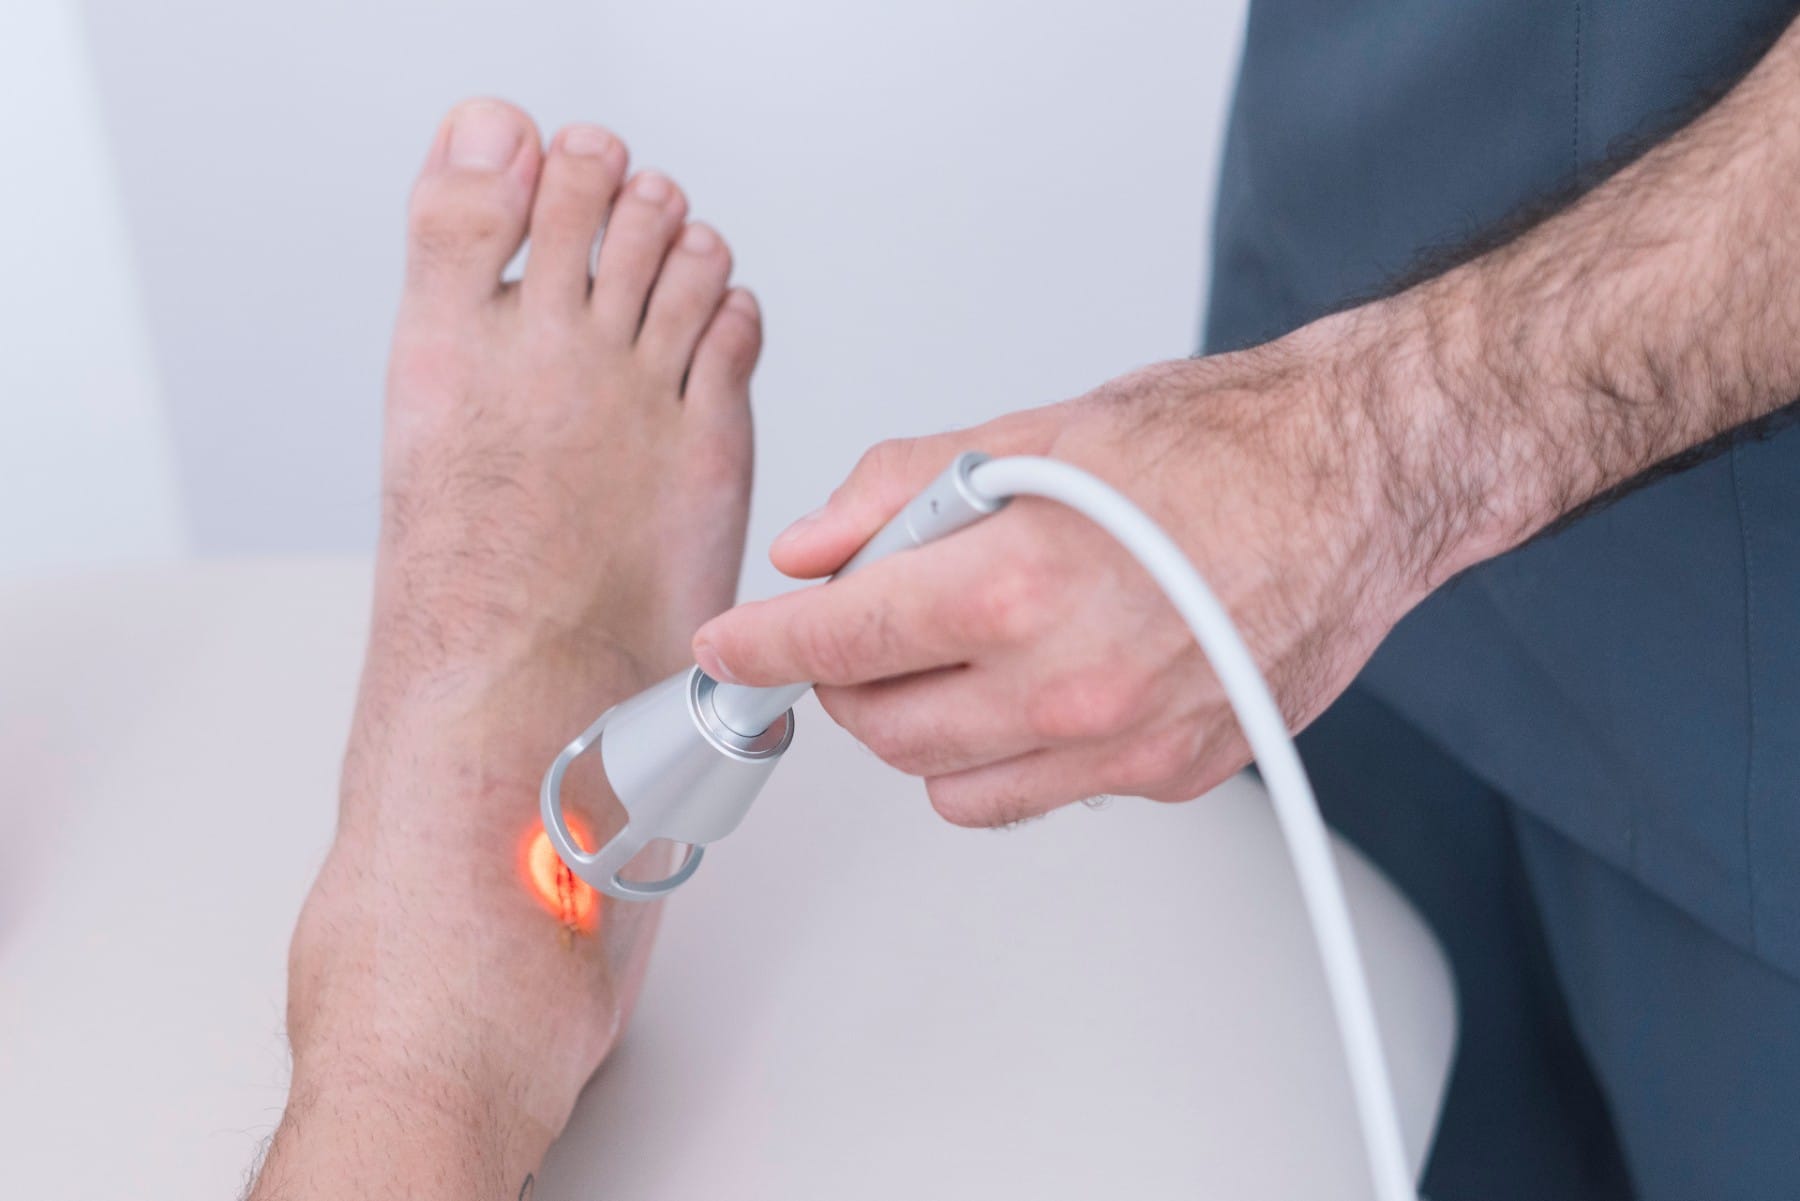 doctor performing laser therapy on a patient's foot